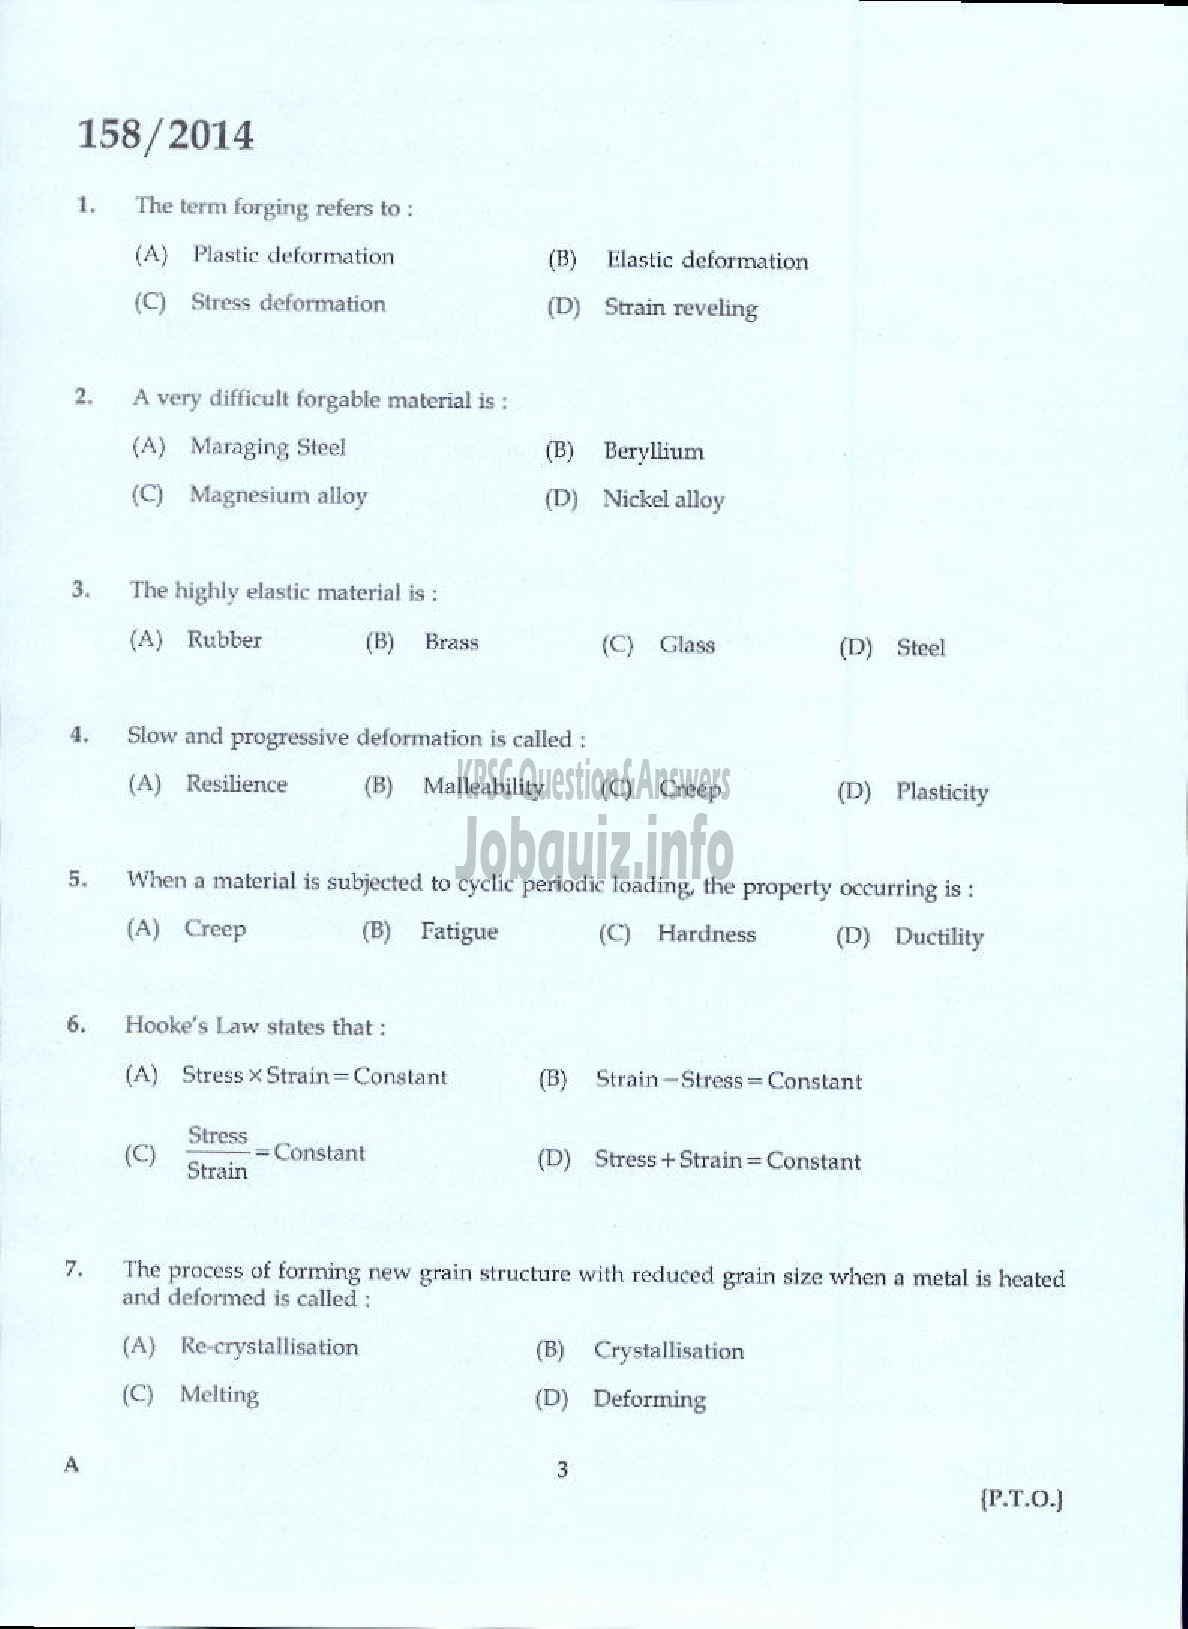 Kerala PSC Question Paper - TRADESMAN SMITHY FORGING AND HEAT TREATING TECHNICAL EDUCATION KTM AND KKD-1